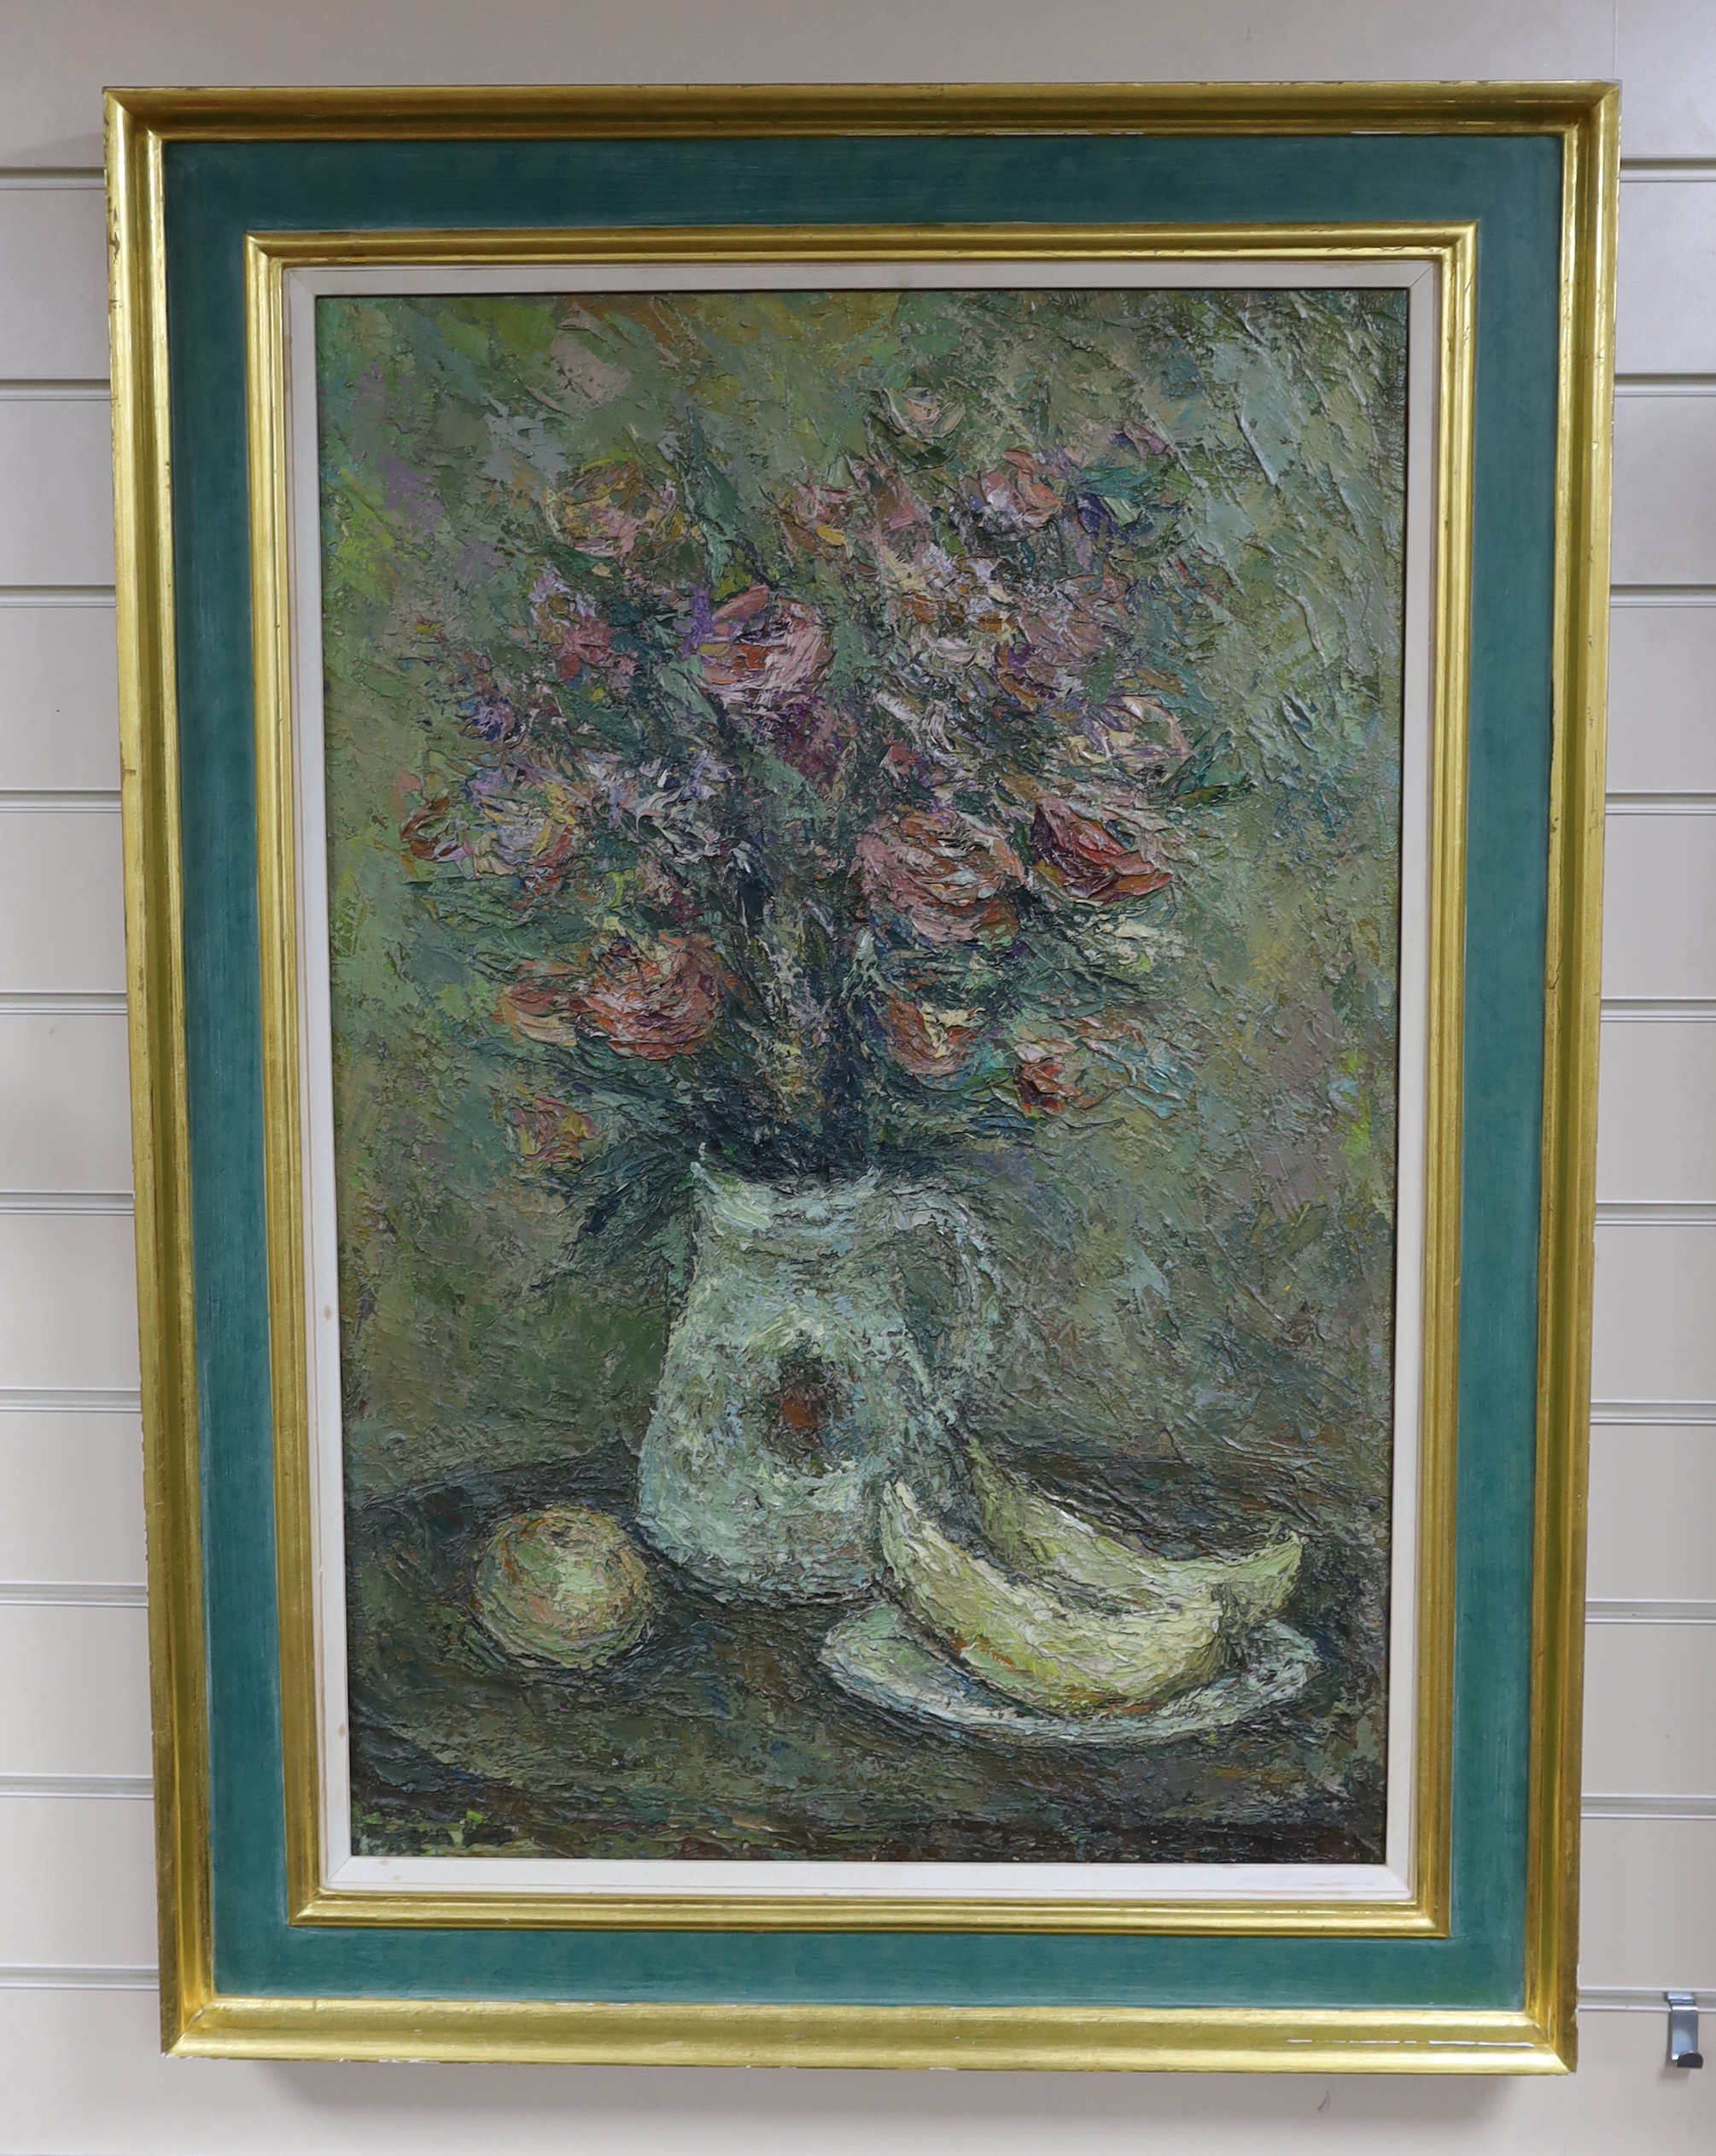 Russian School, impasto oil on canvas, Still life of flowers in a vase with fruit, 76cm x 51cm